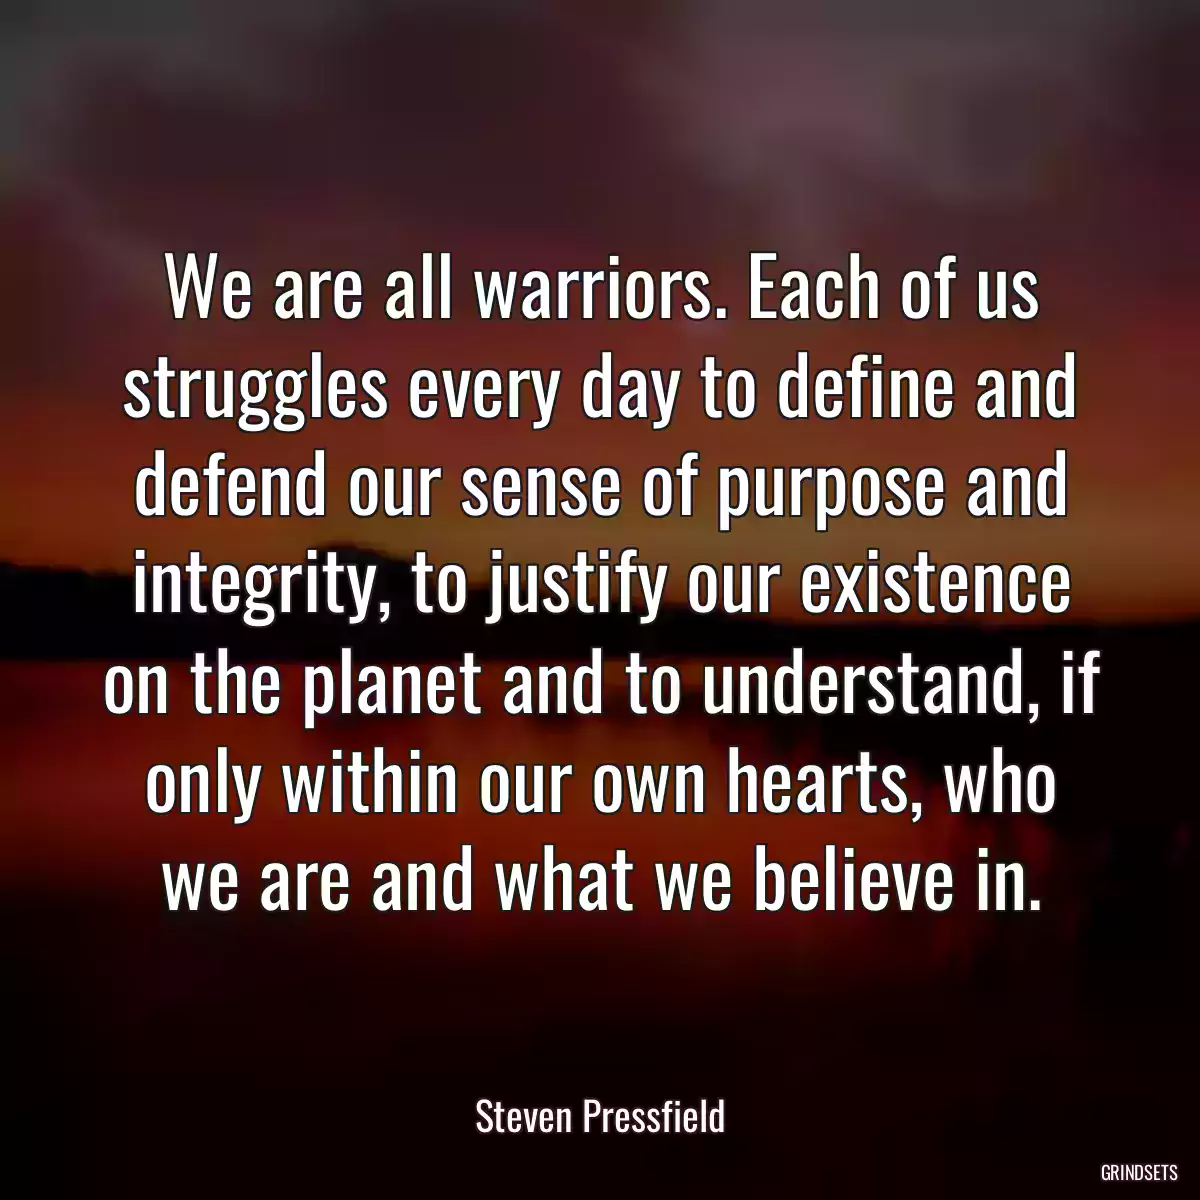 We are all warriors. Each of us struggles every day to define and defend our sense of purpose and integrity, to justify our existence on the planet and to understand, if only within our own hearts, who we are and what we believe in.